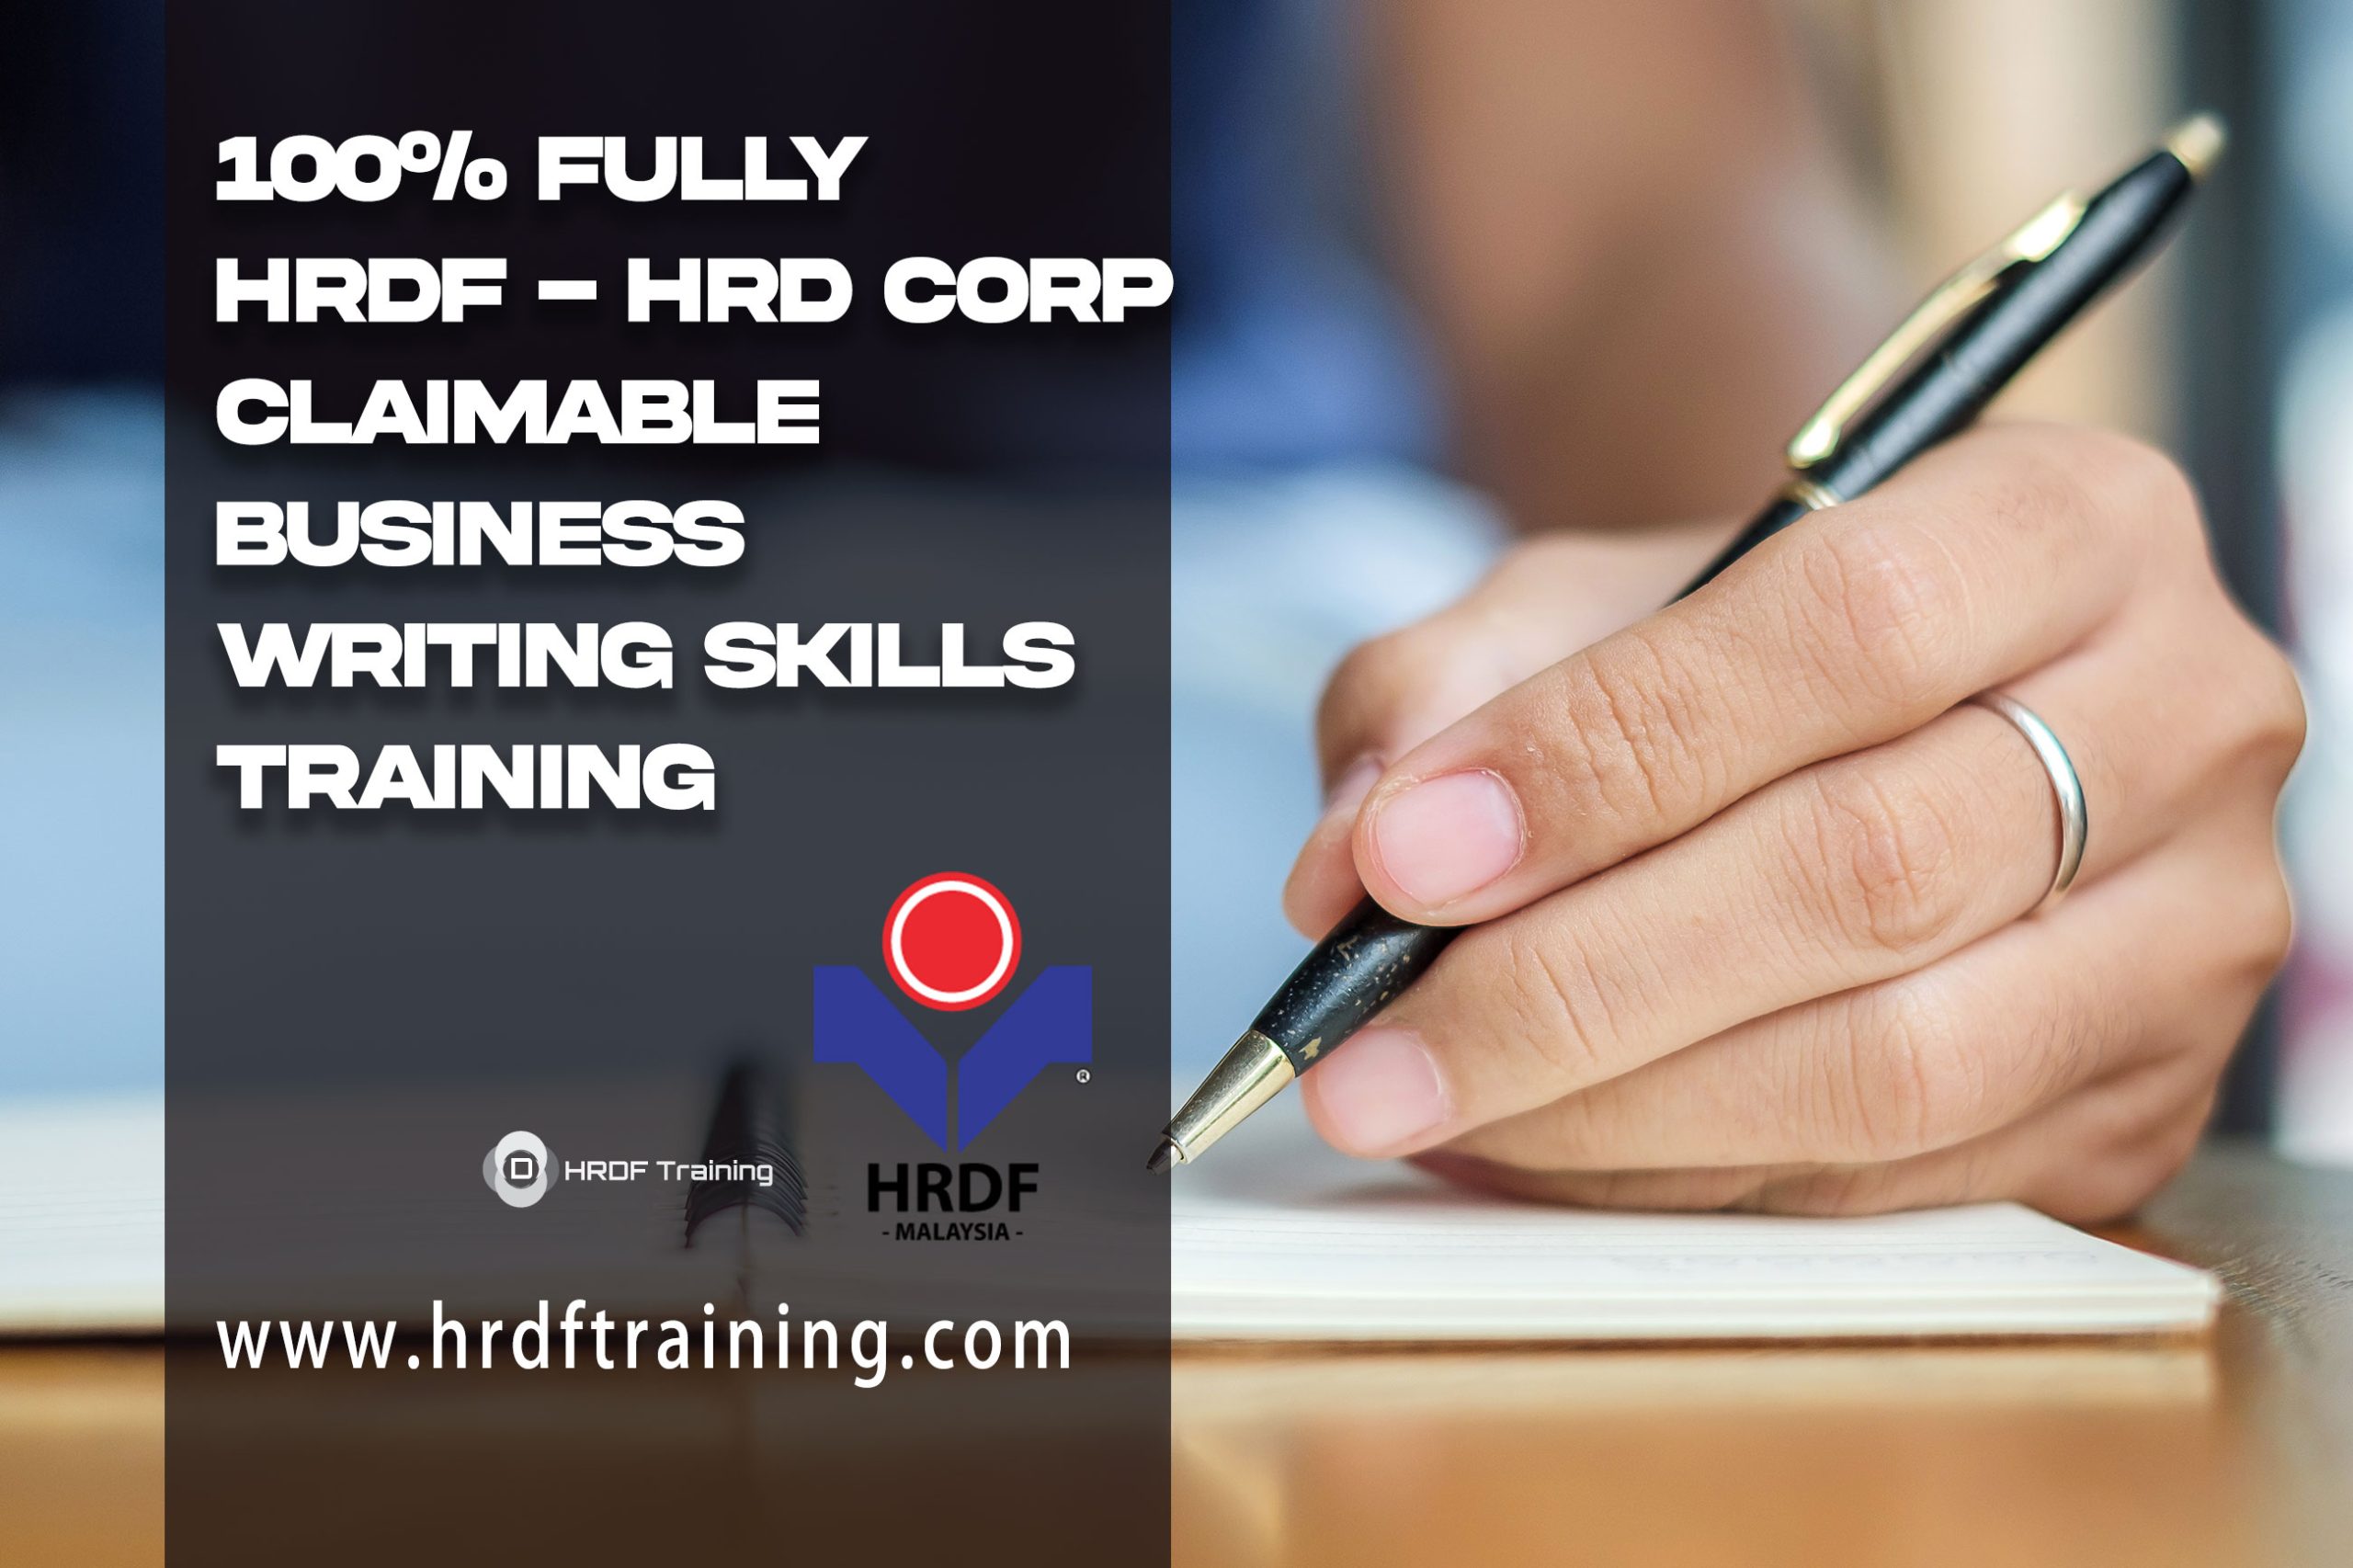 HRDF - HRD Corp Claimable Business Writing Skills